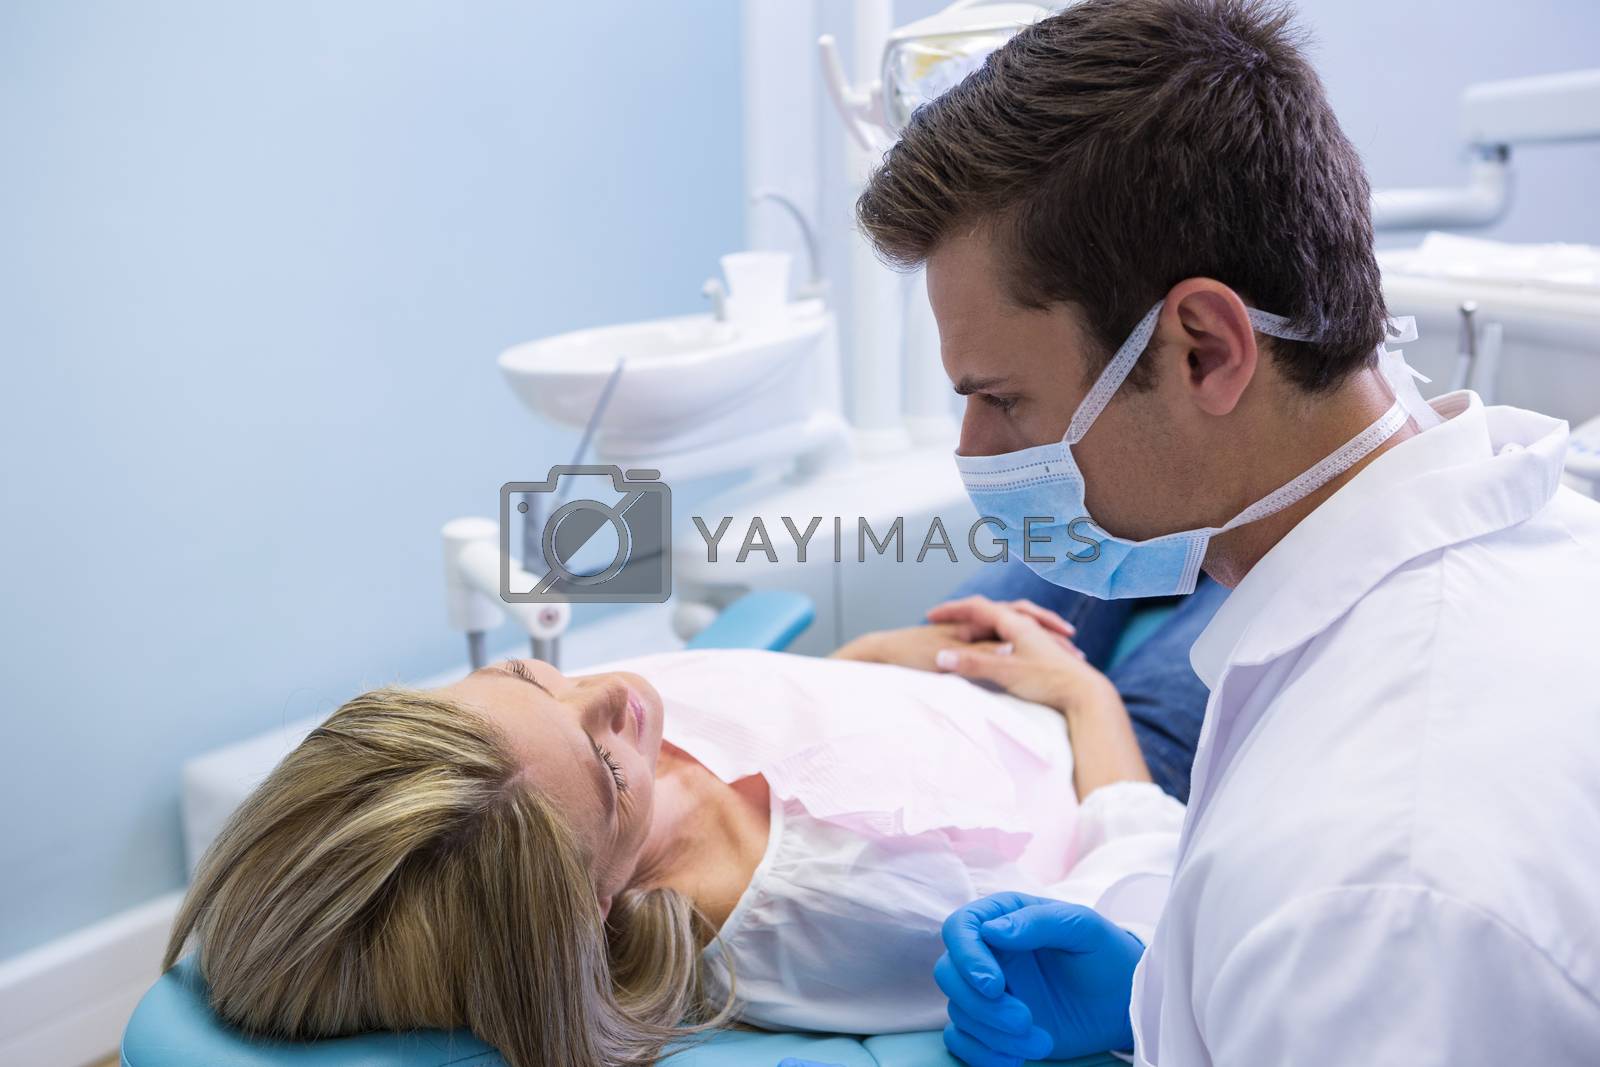 Royalty free image of Close up of doctor talking with patient by Wavebreakmedia